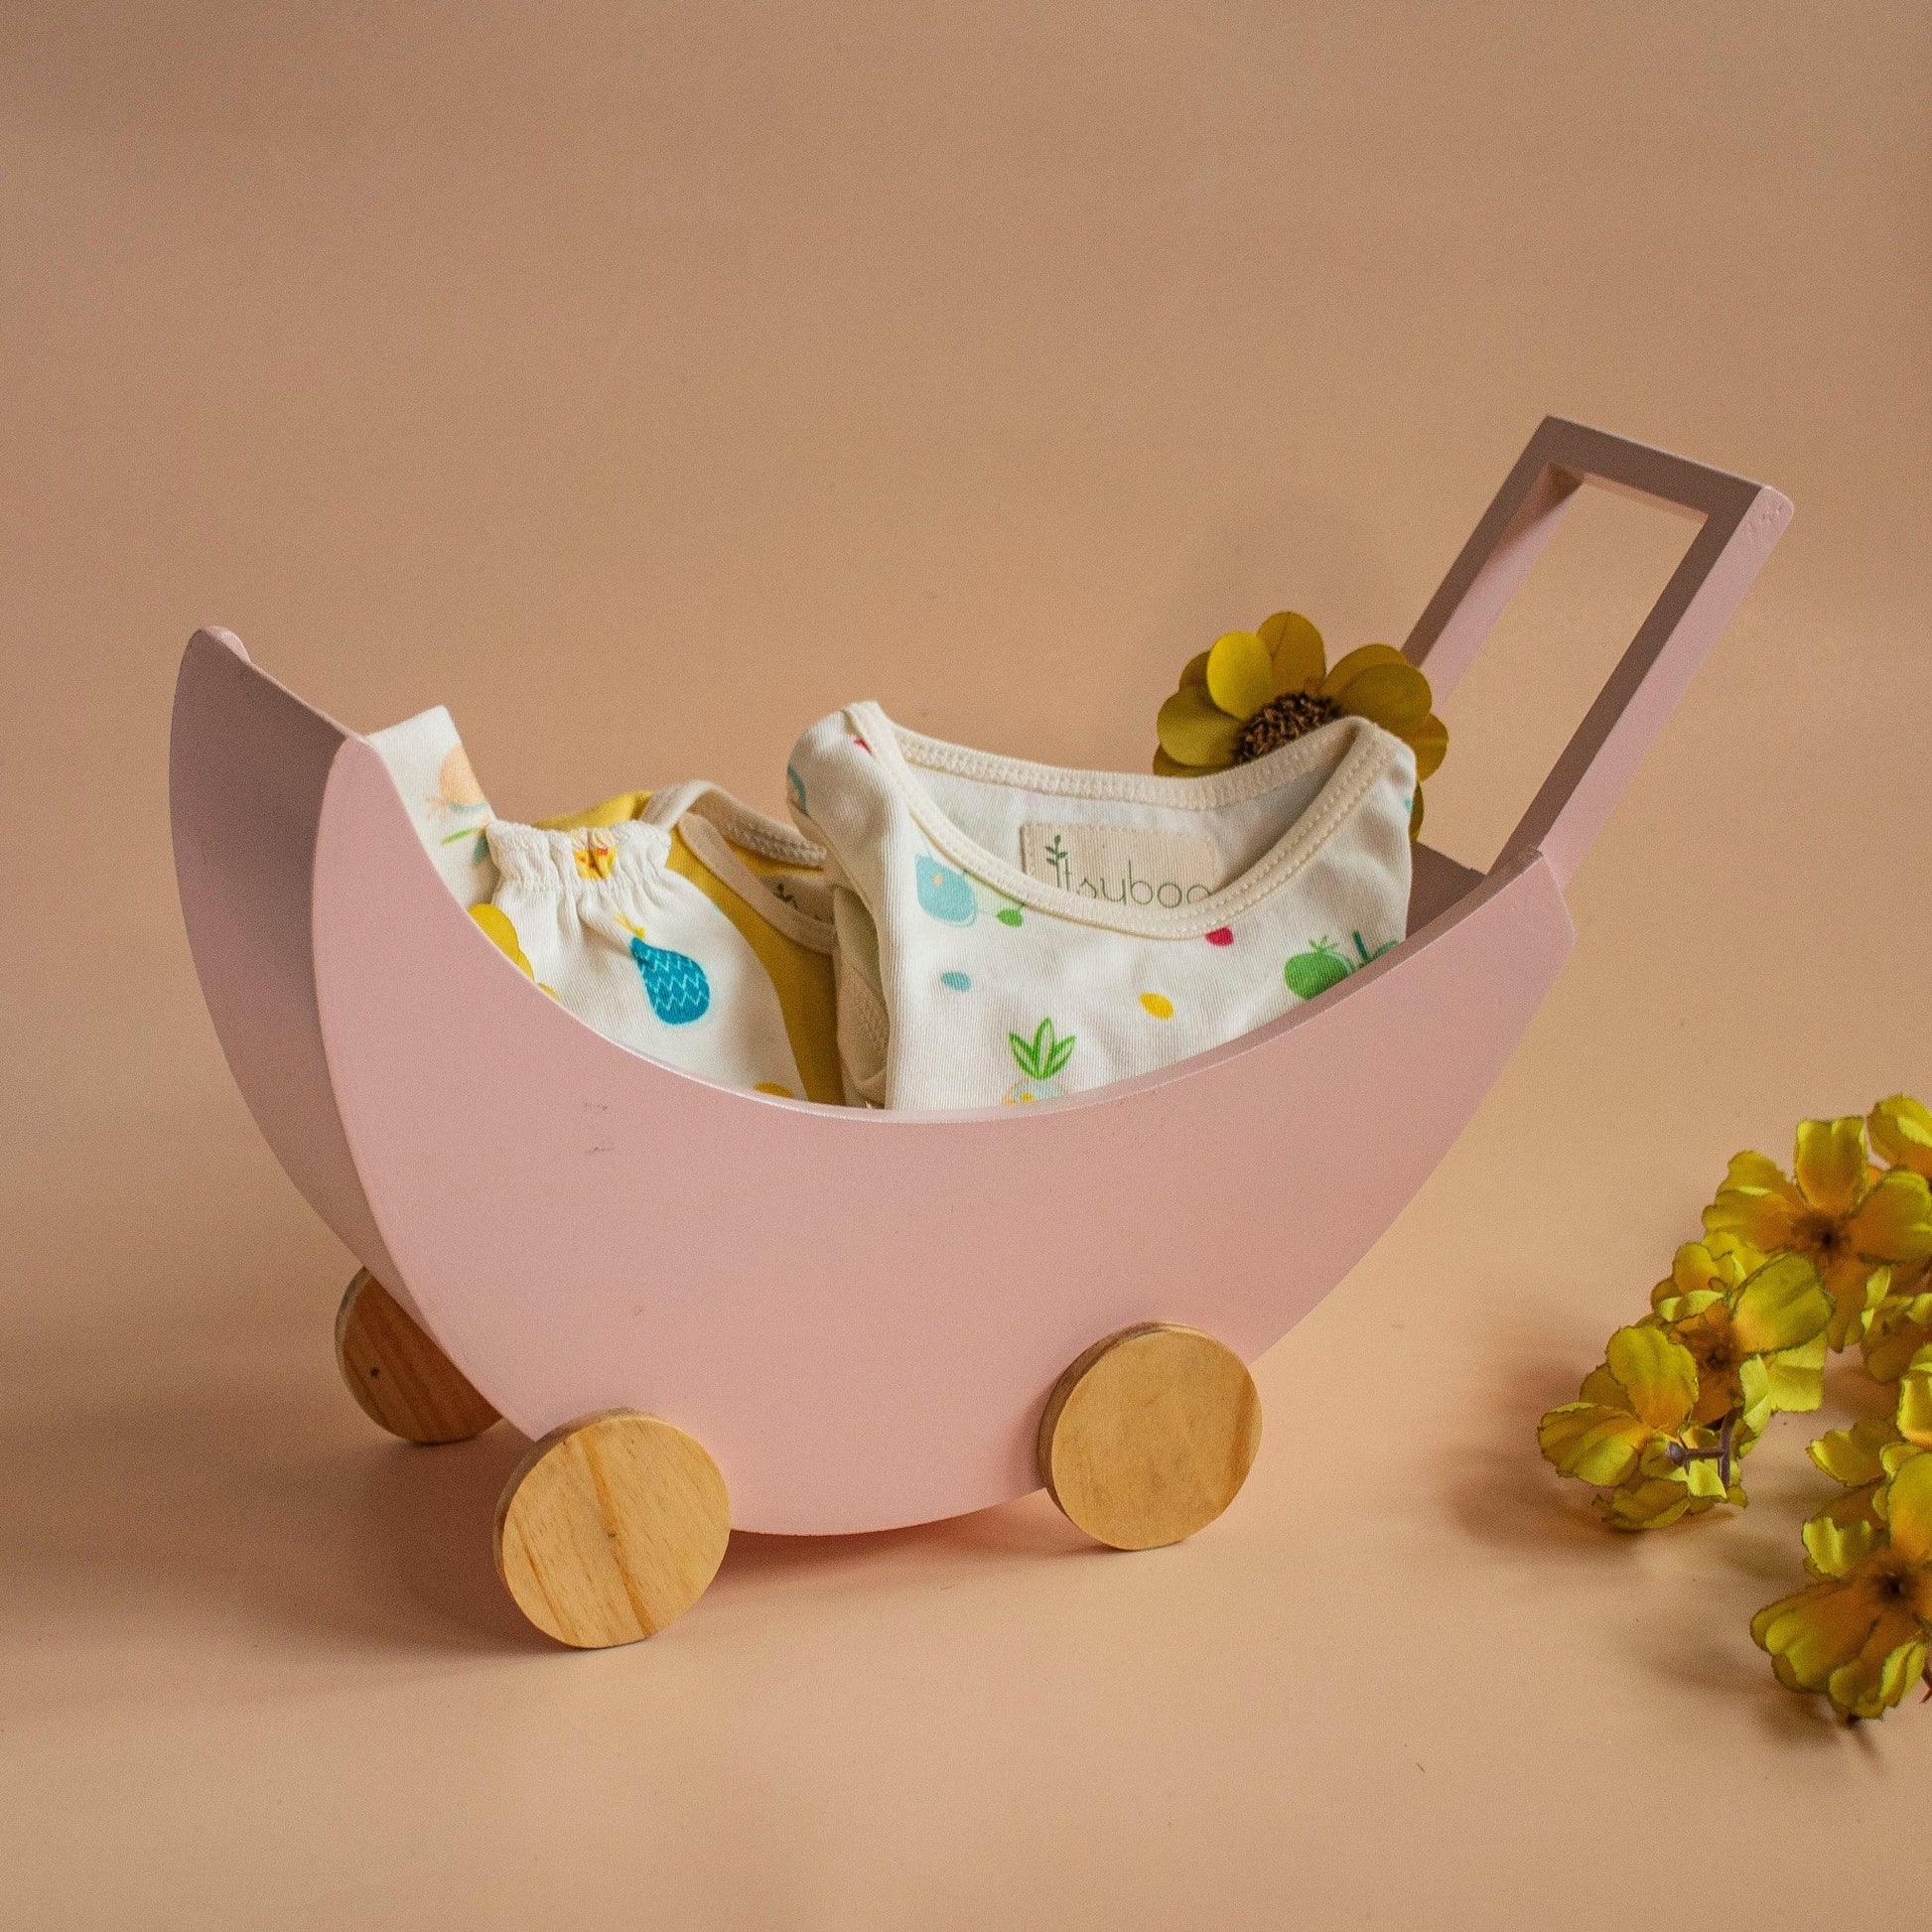 Baby Cot Basket For Baby Shower Gifitng - Ebony WoodcraftsConcept Gifting Bases